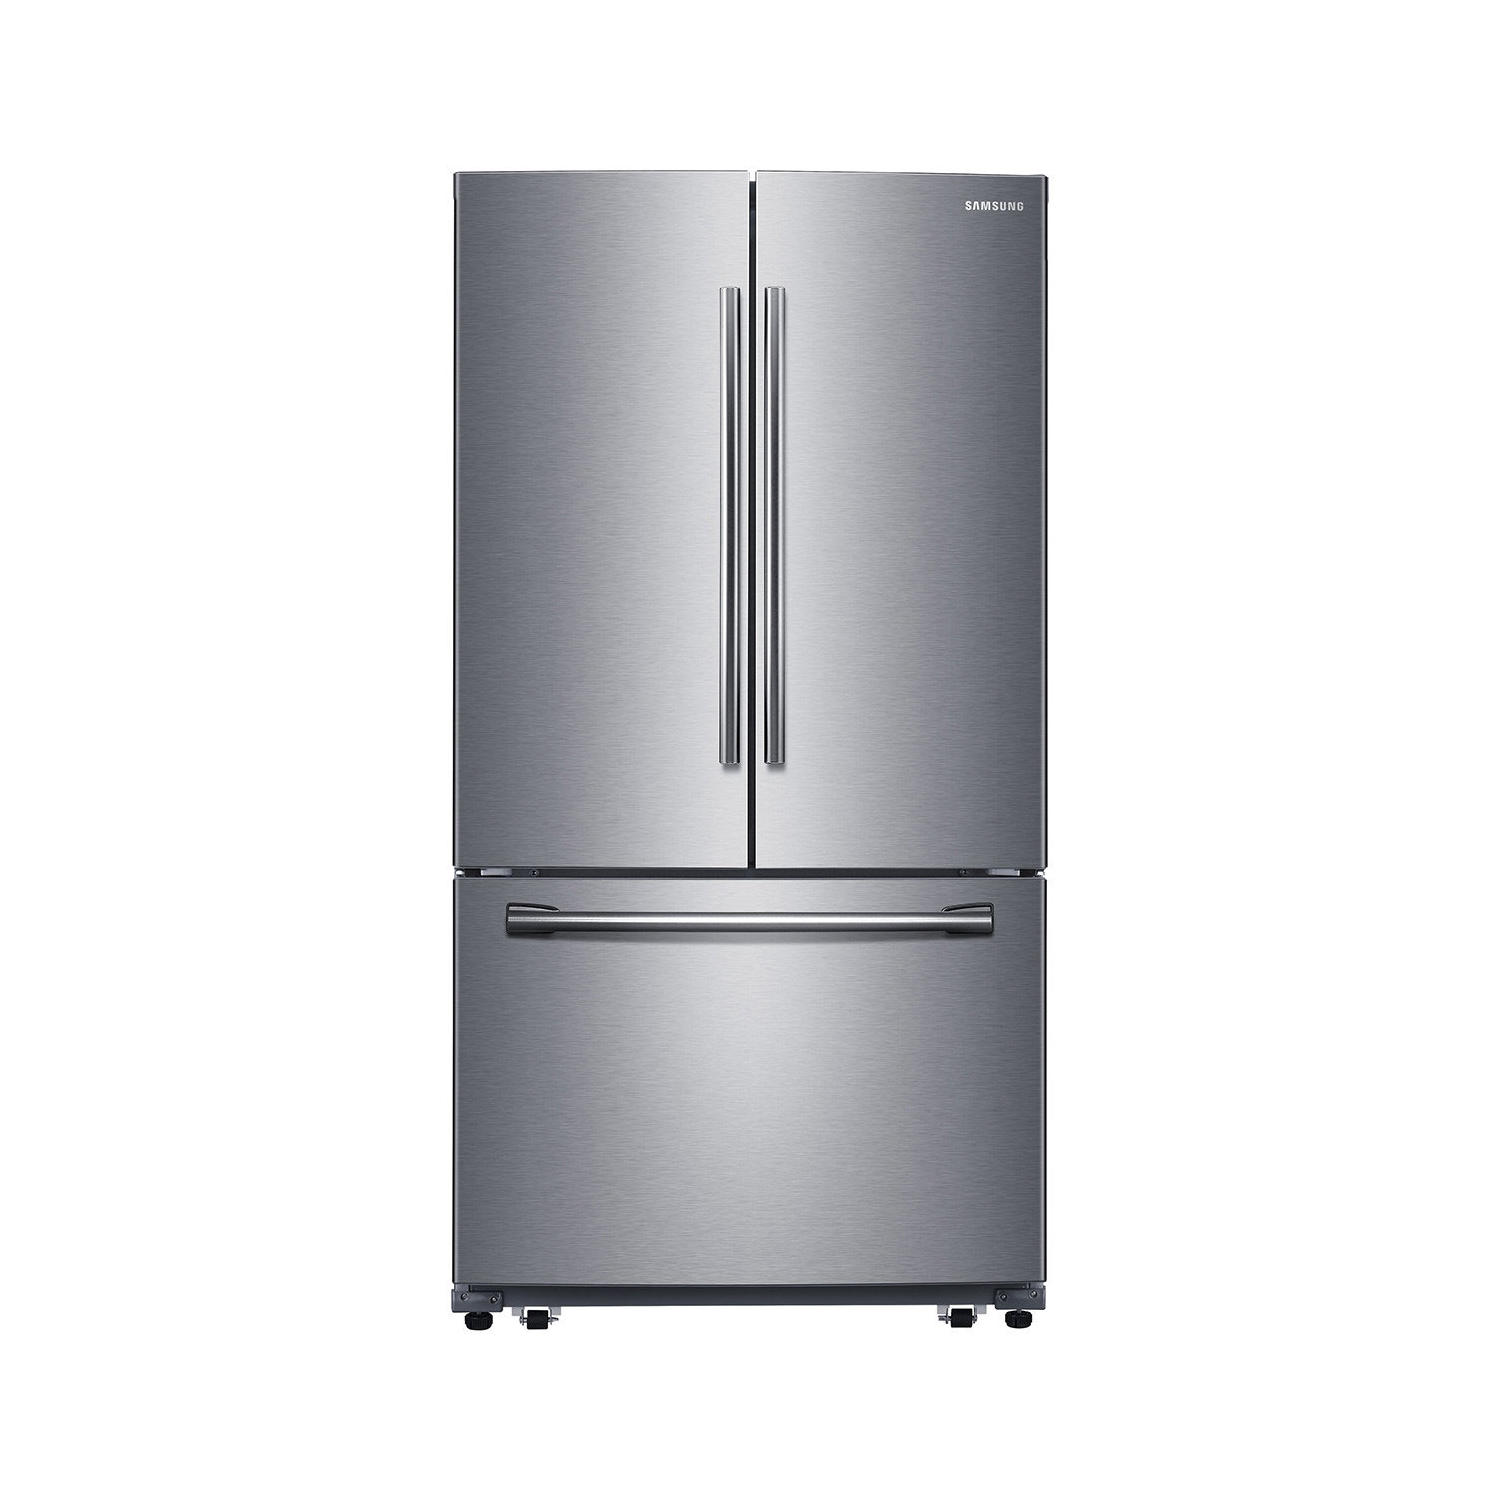 Samsung RF260BEAESR 26 cu.ft. French Door with Filtered Ice Maker